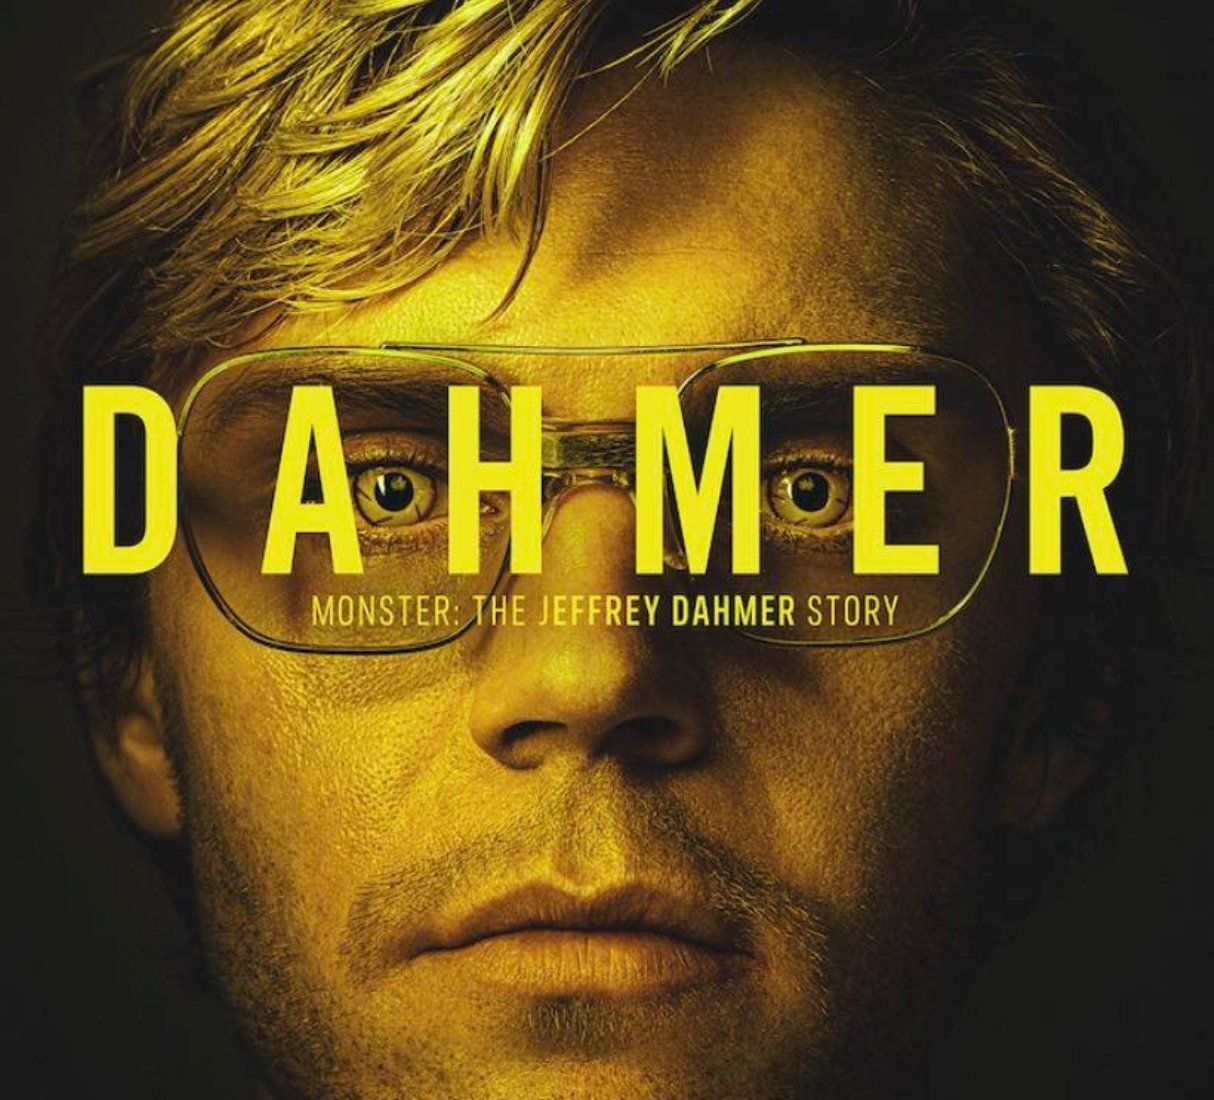 Monster: Dahmer: The Jeffrey Dahmer Story serves as one of Netflix's best crime shows